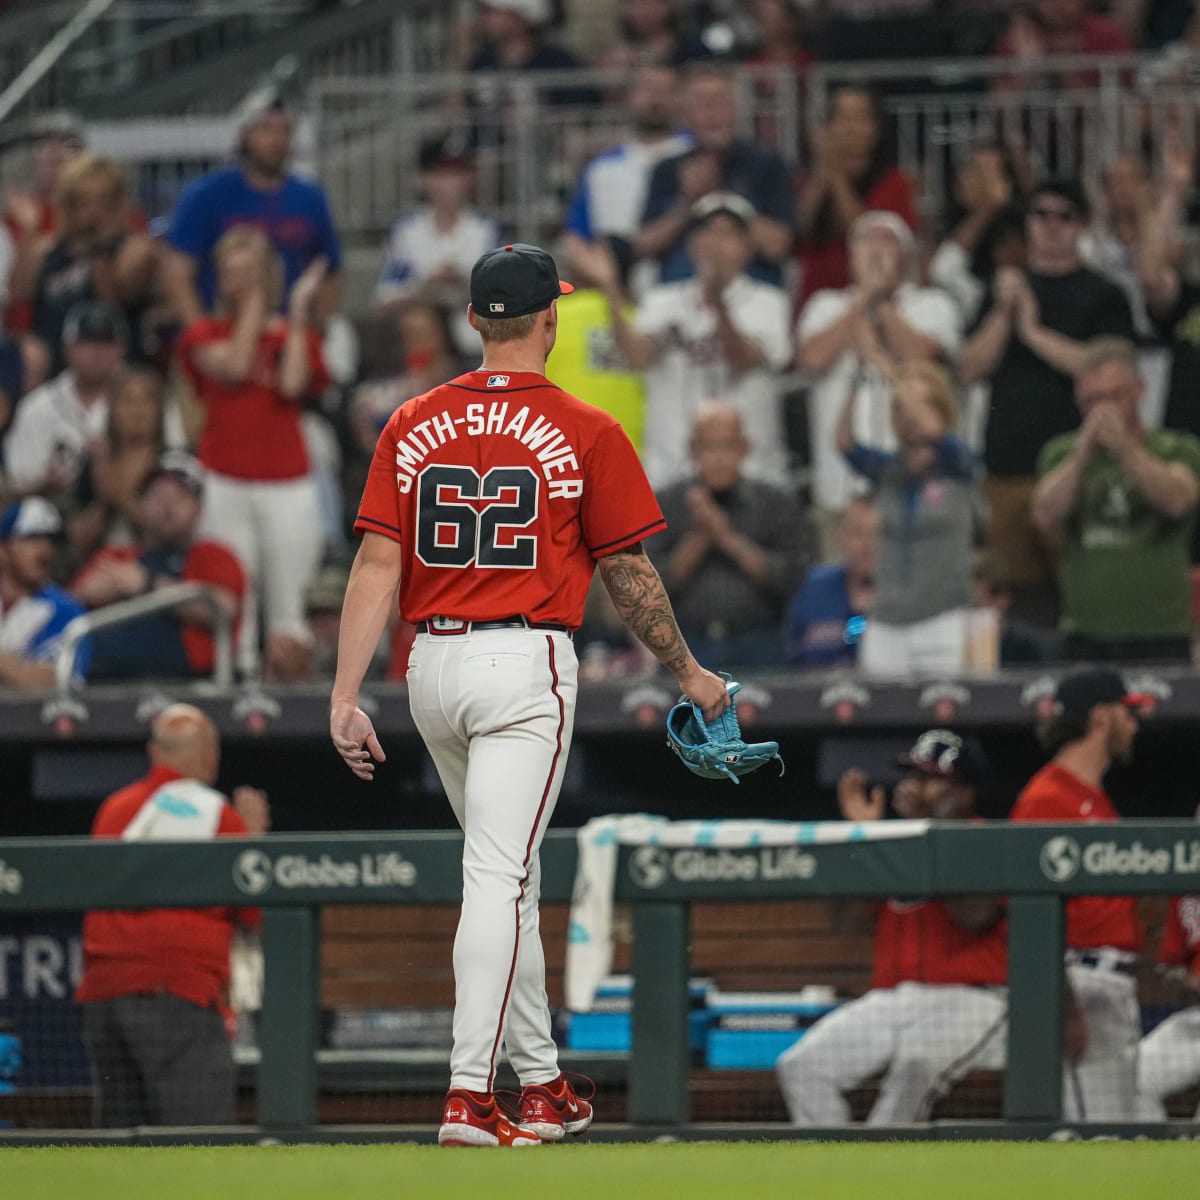 Atlanta Braves Rookie Makes Team History By Doing Something Not Seen in  More Than 30 Years - Fastball